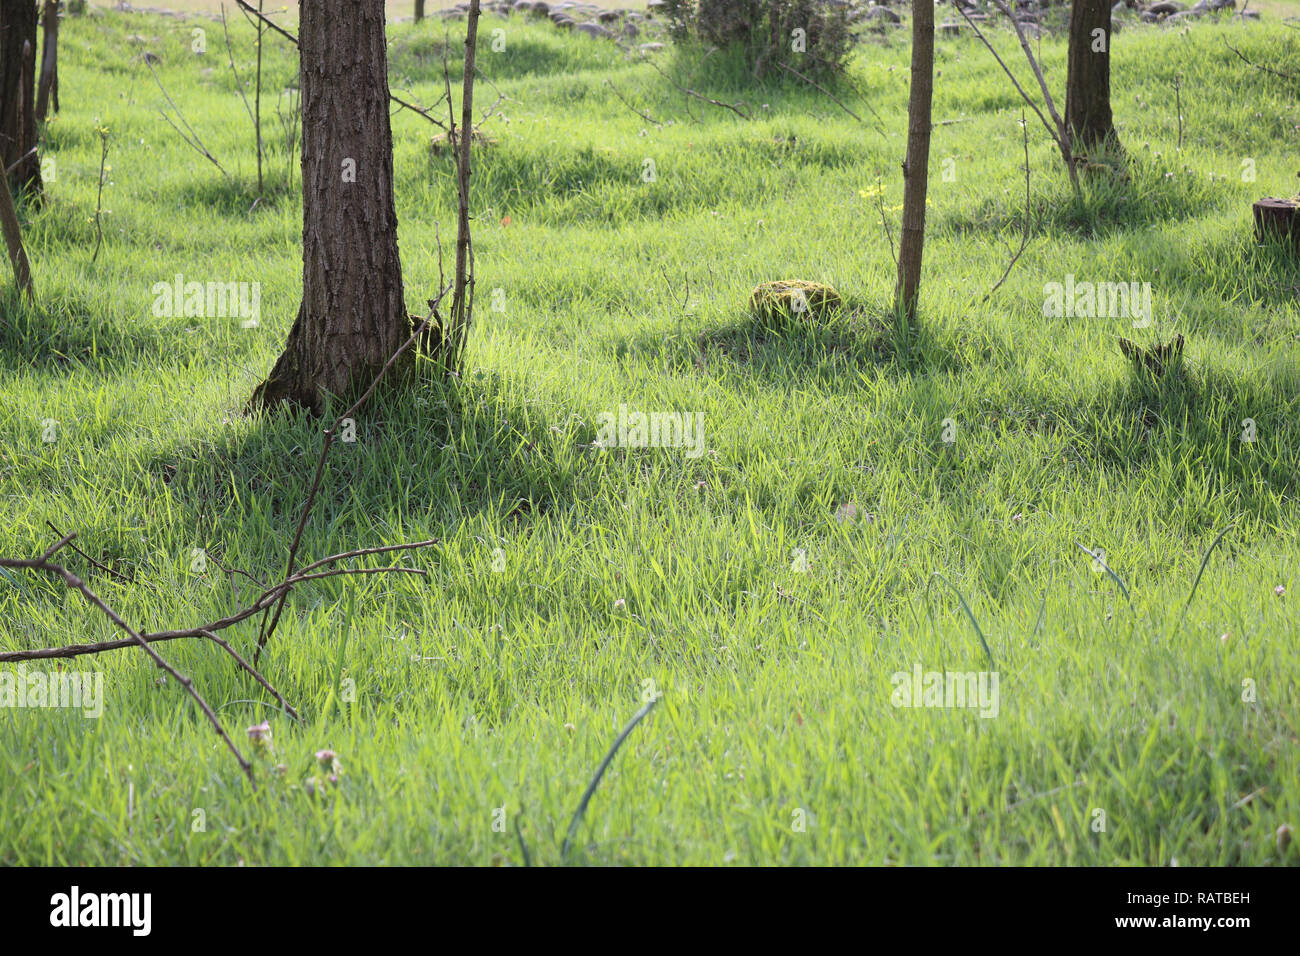 A lawn with mowed grass, some stumps, trunks with bark and branches at sunrise during spring in Cameri, Piedmont region, Italy Stock Photo